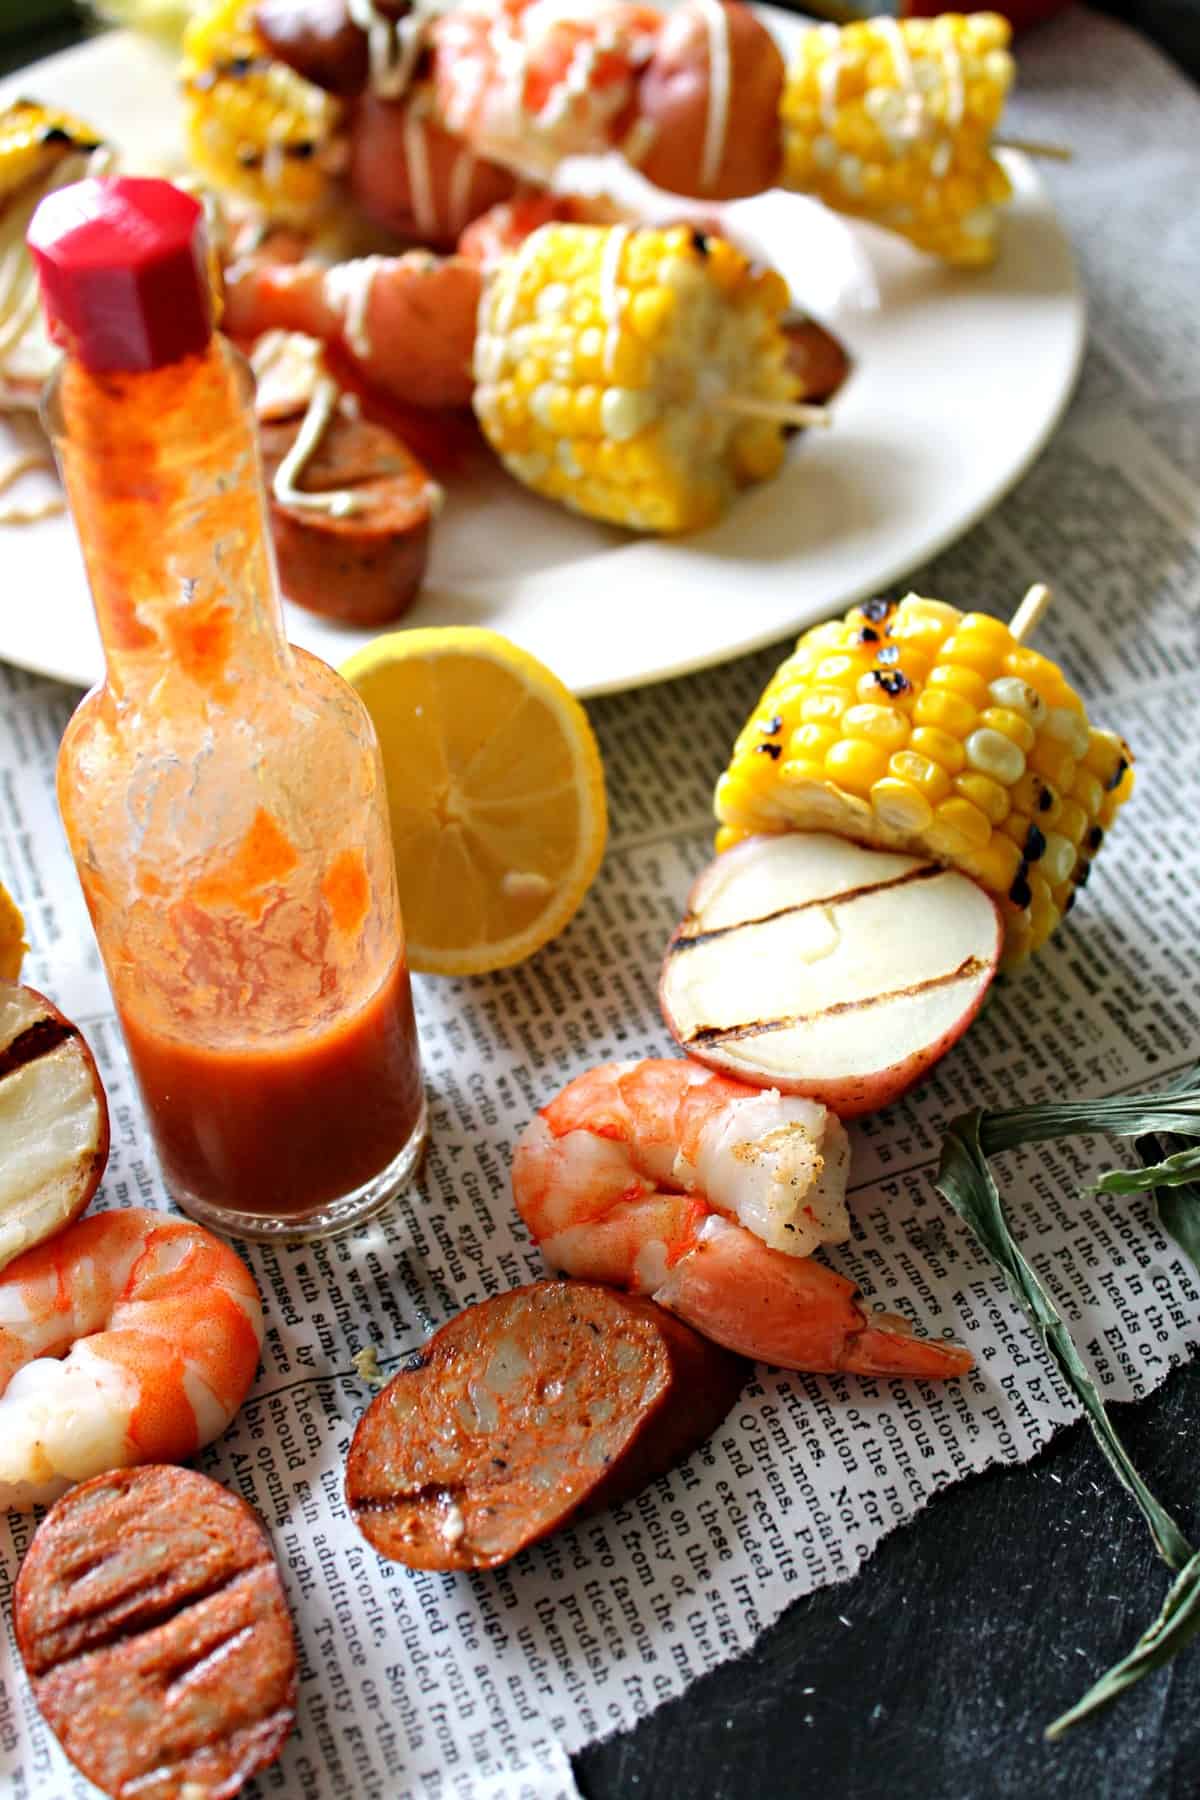 Drizzle some hot sauce on these Shrimp Boil Kabobs for some extra heat on this perfect summer meal